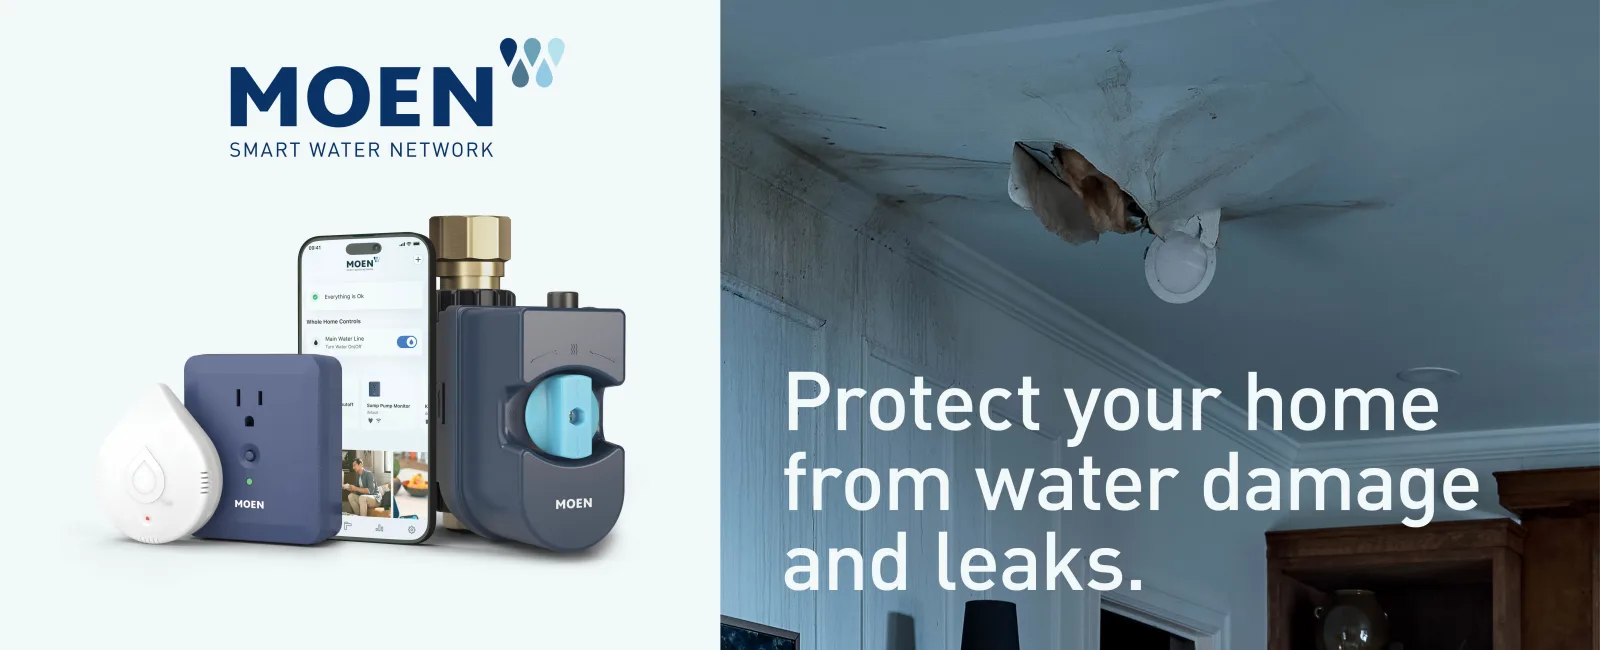 Moen - Brand Page - Smart Water Networks Image